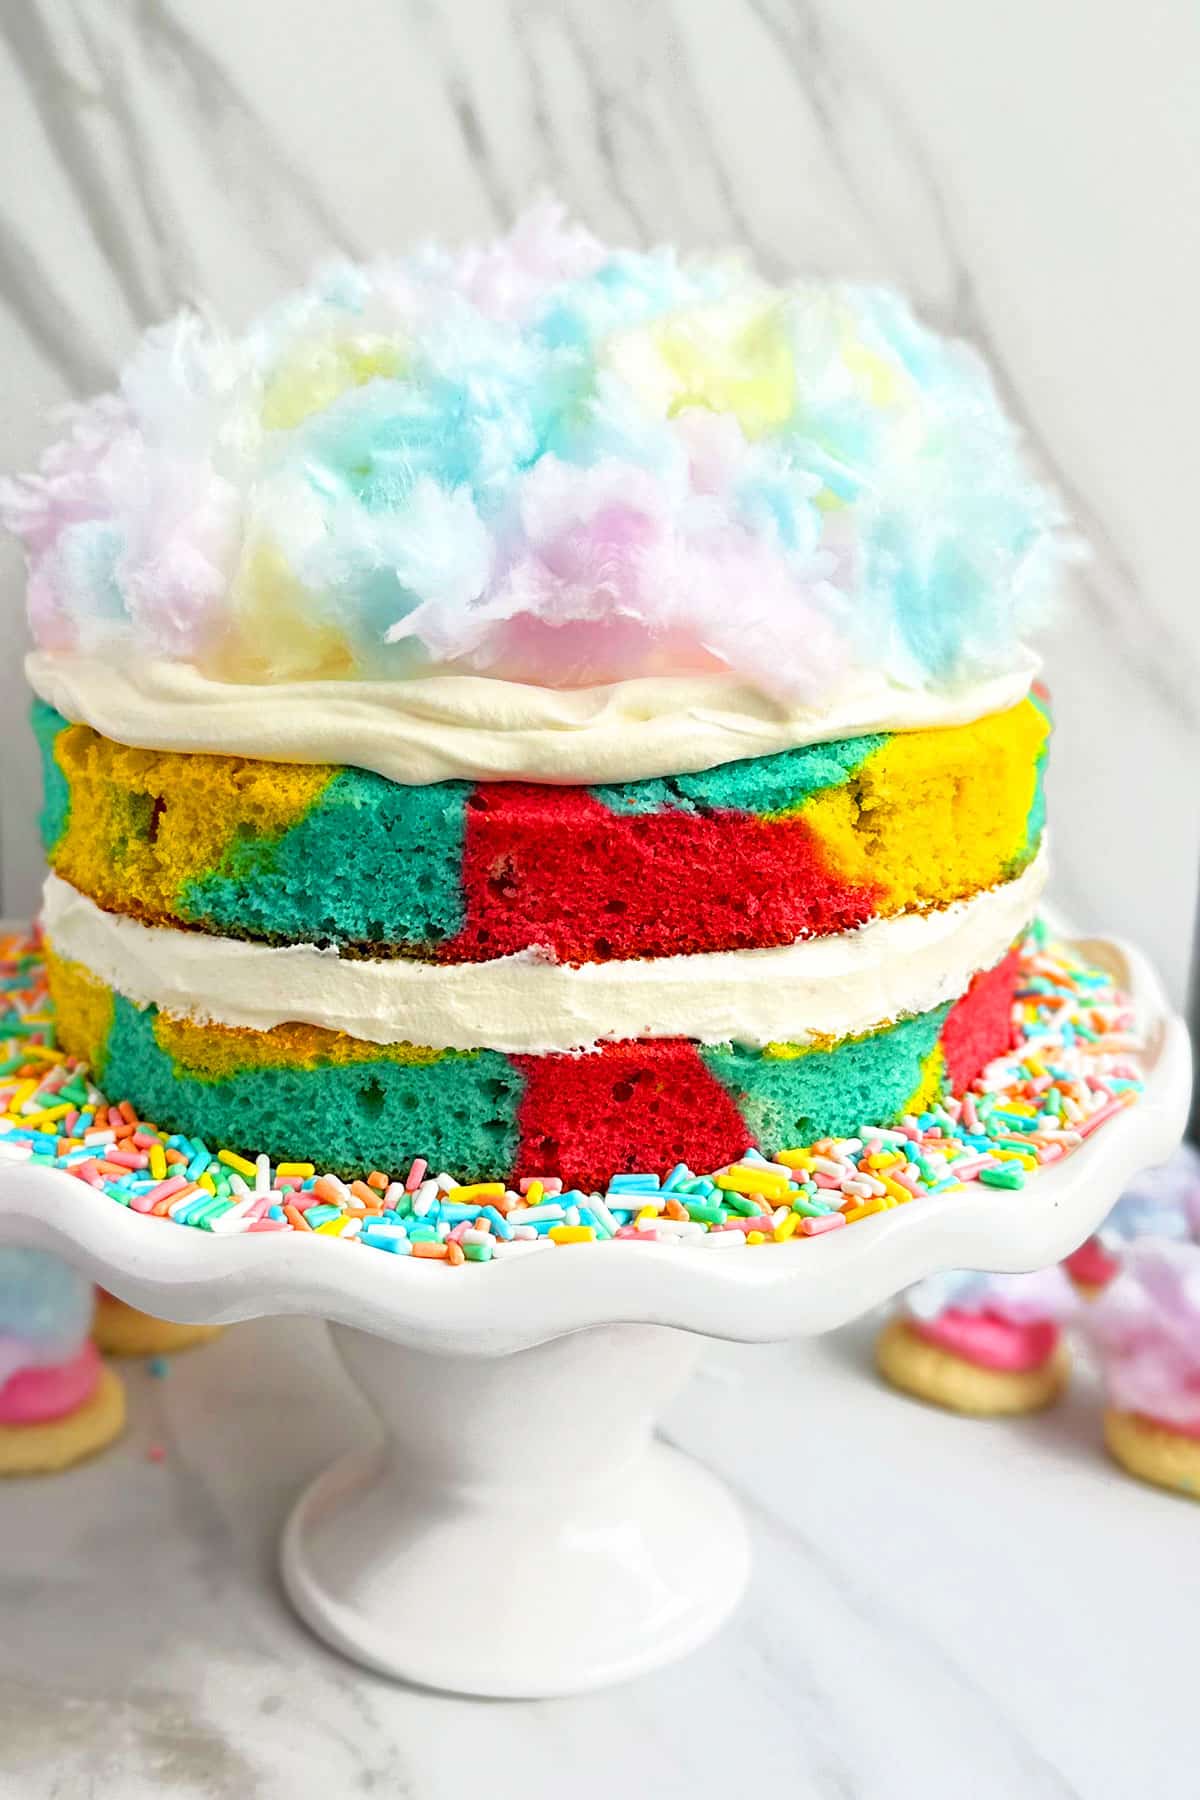 Easy Cotton Candy Cake With Whipped Cream Frosting on White Cake Stand.